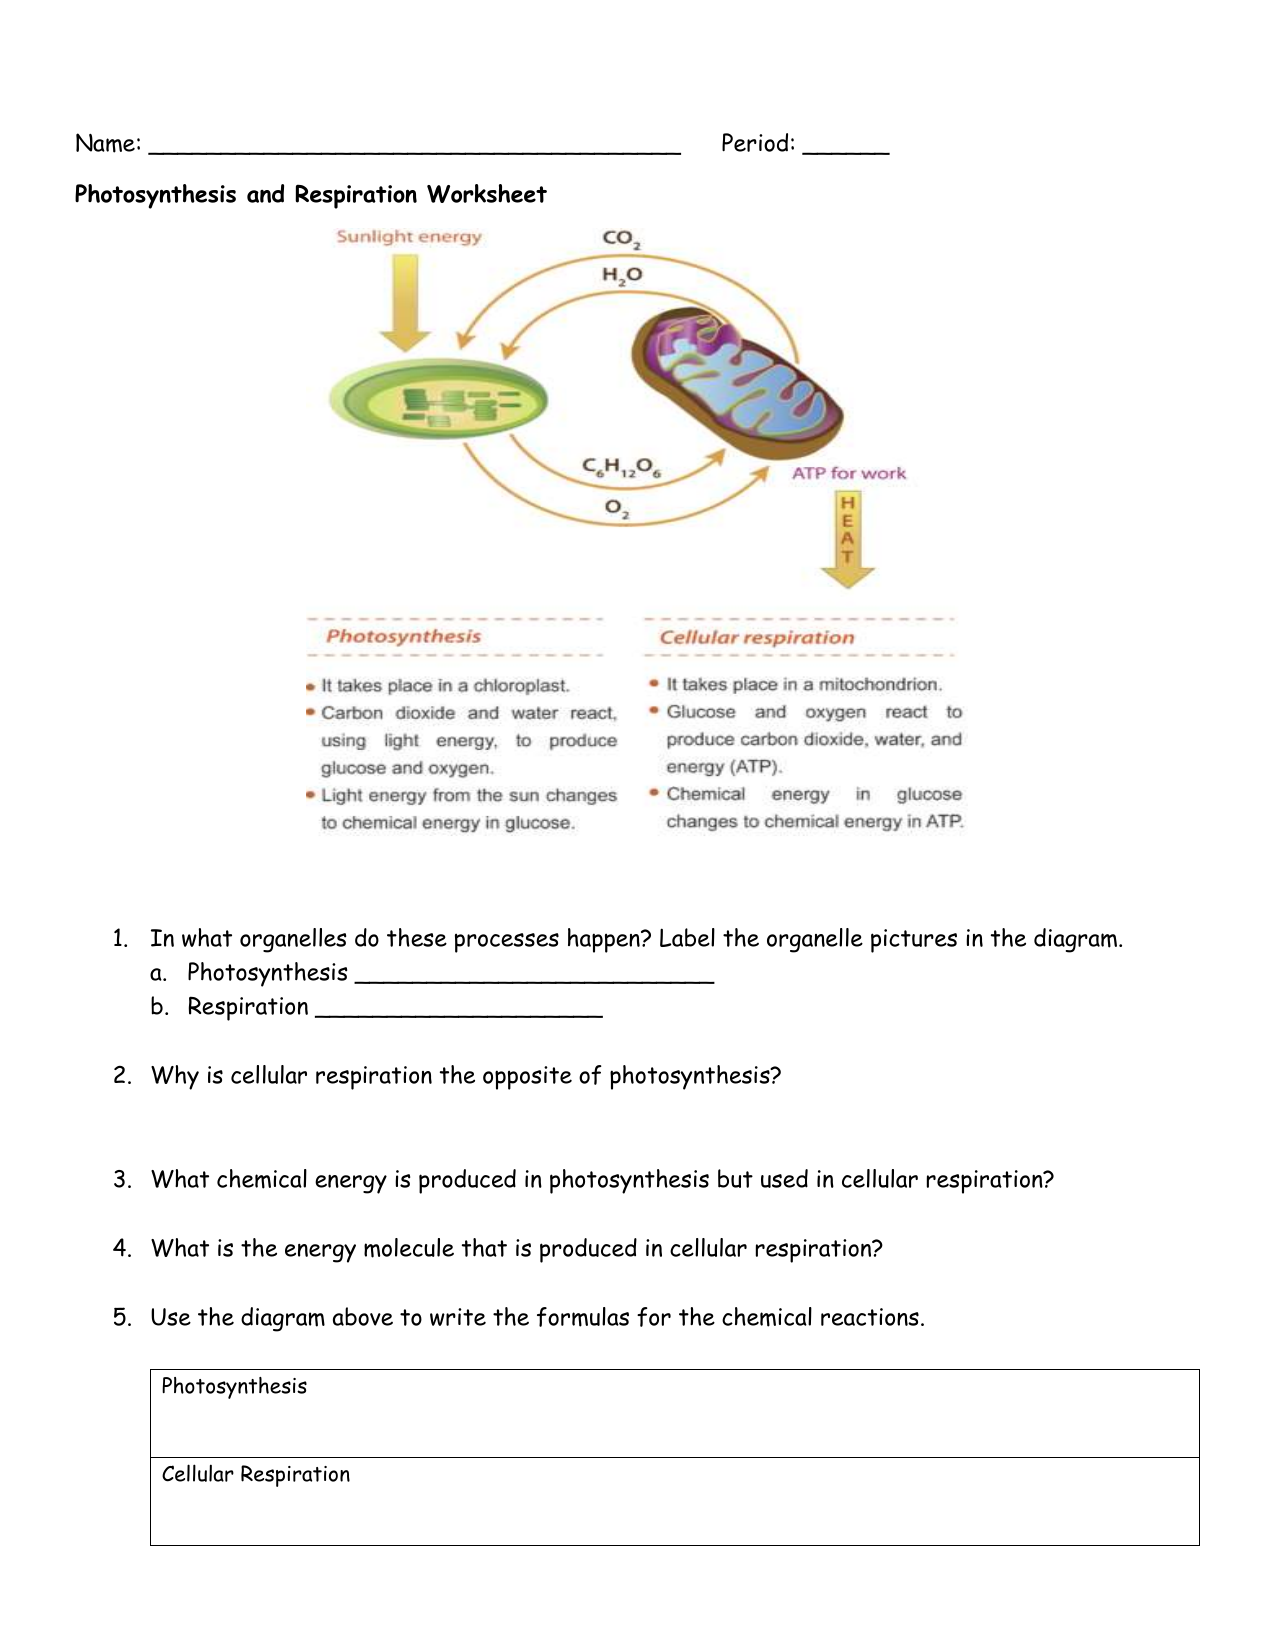 Photosynthesis and Respiration Worksheet Regarding Photosynthesis And Respiration Worksheet